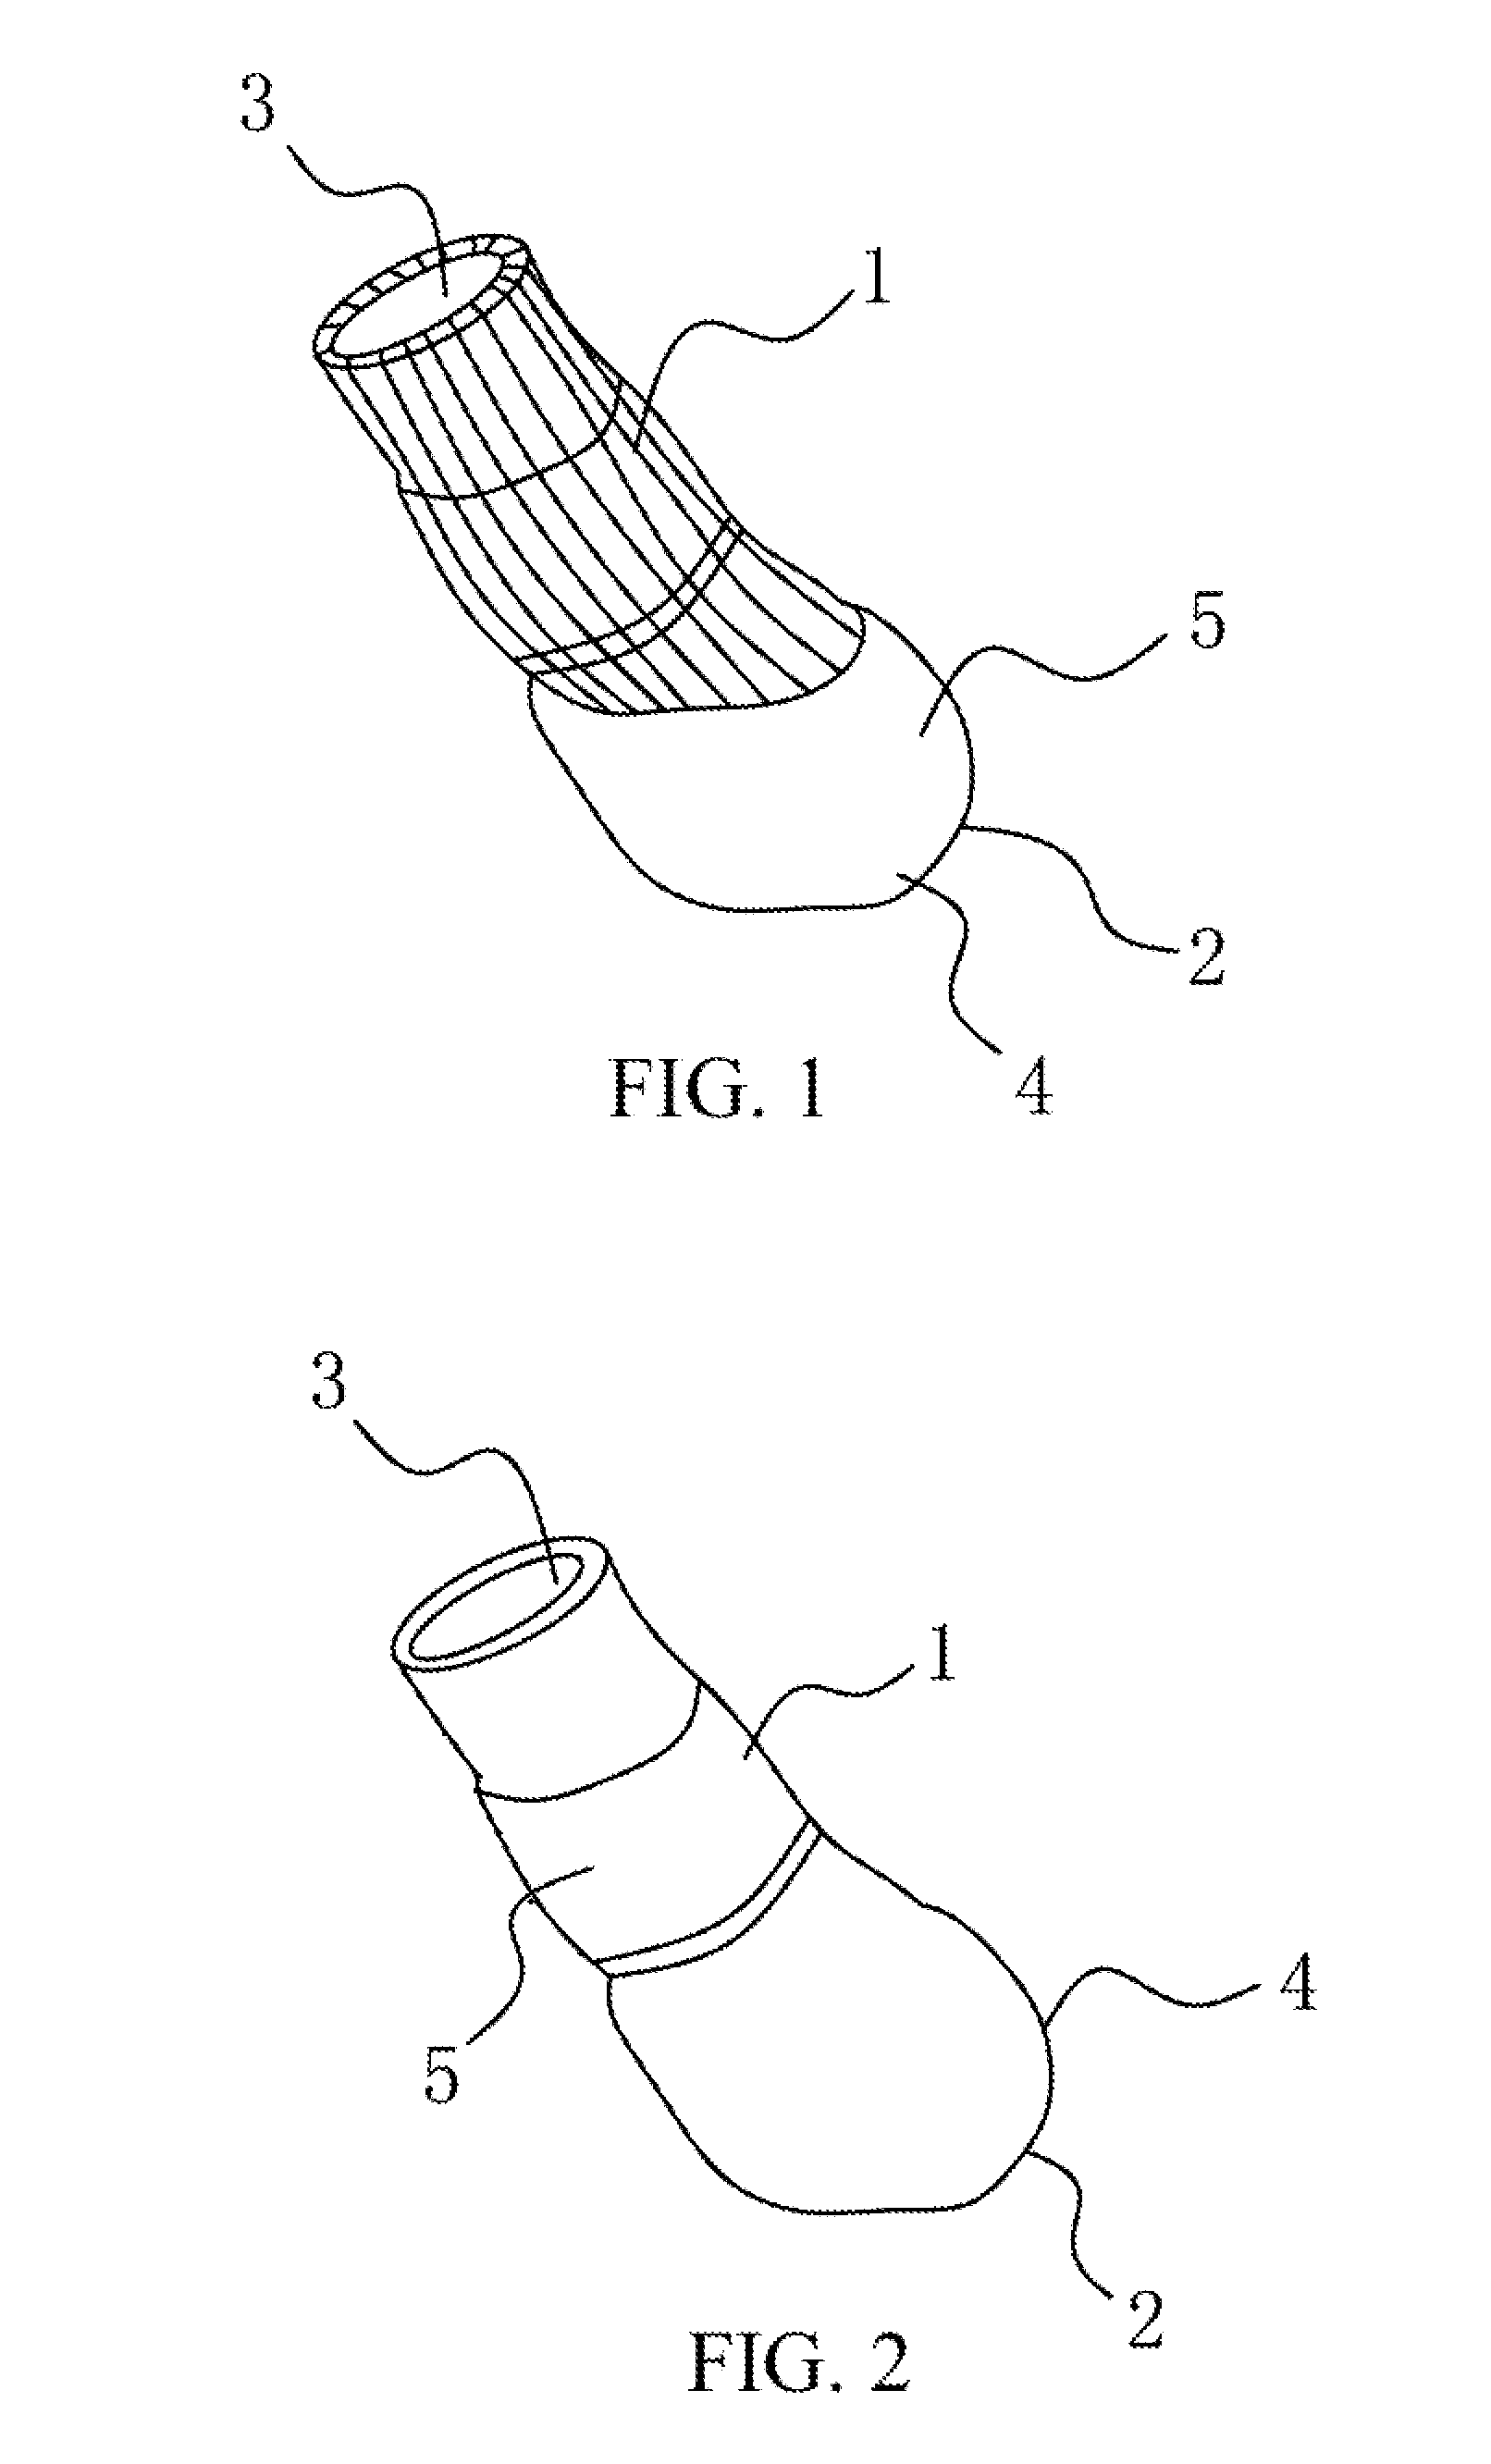 Pet socks and manufacturing method thereof